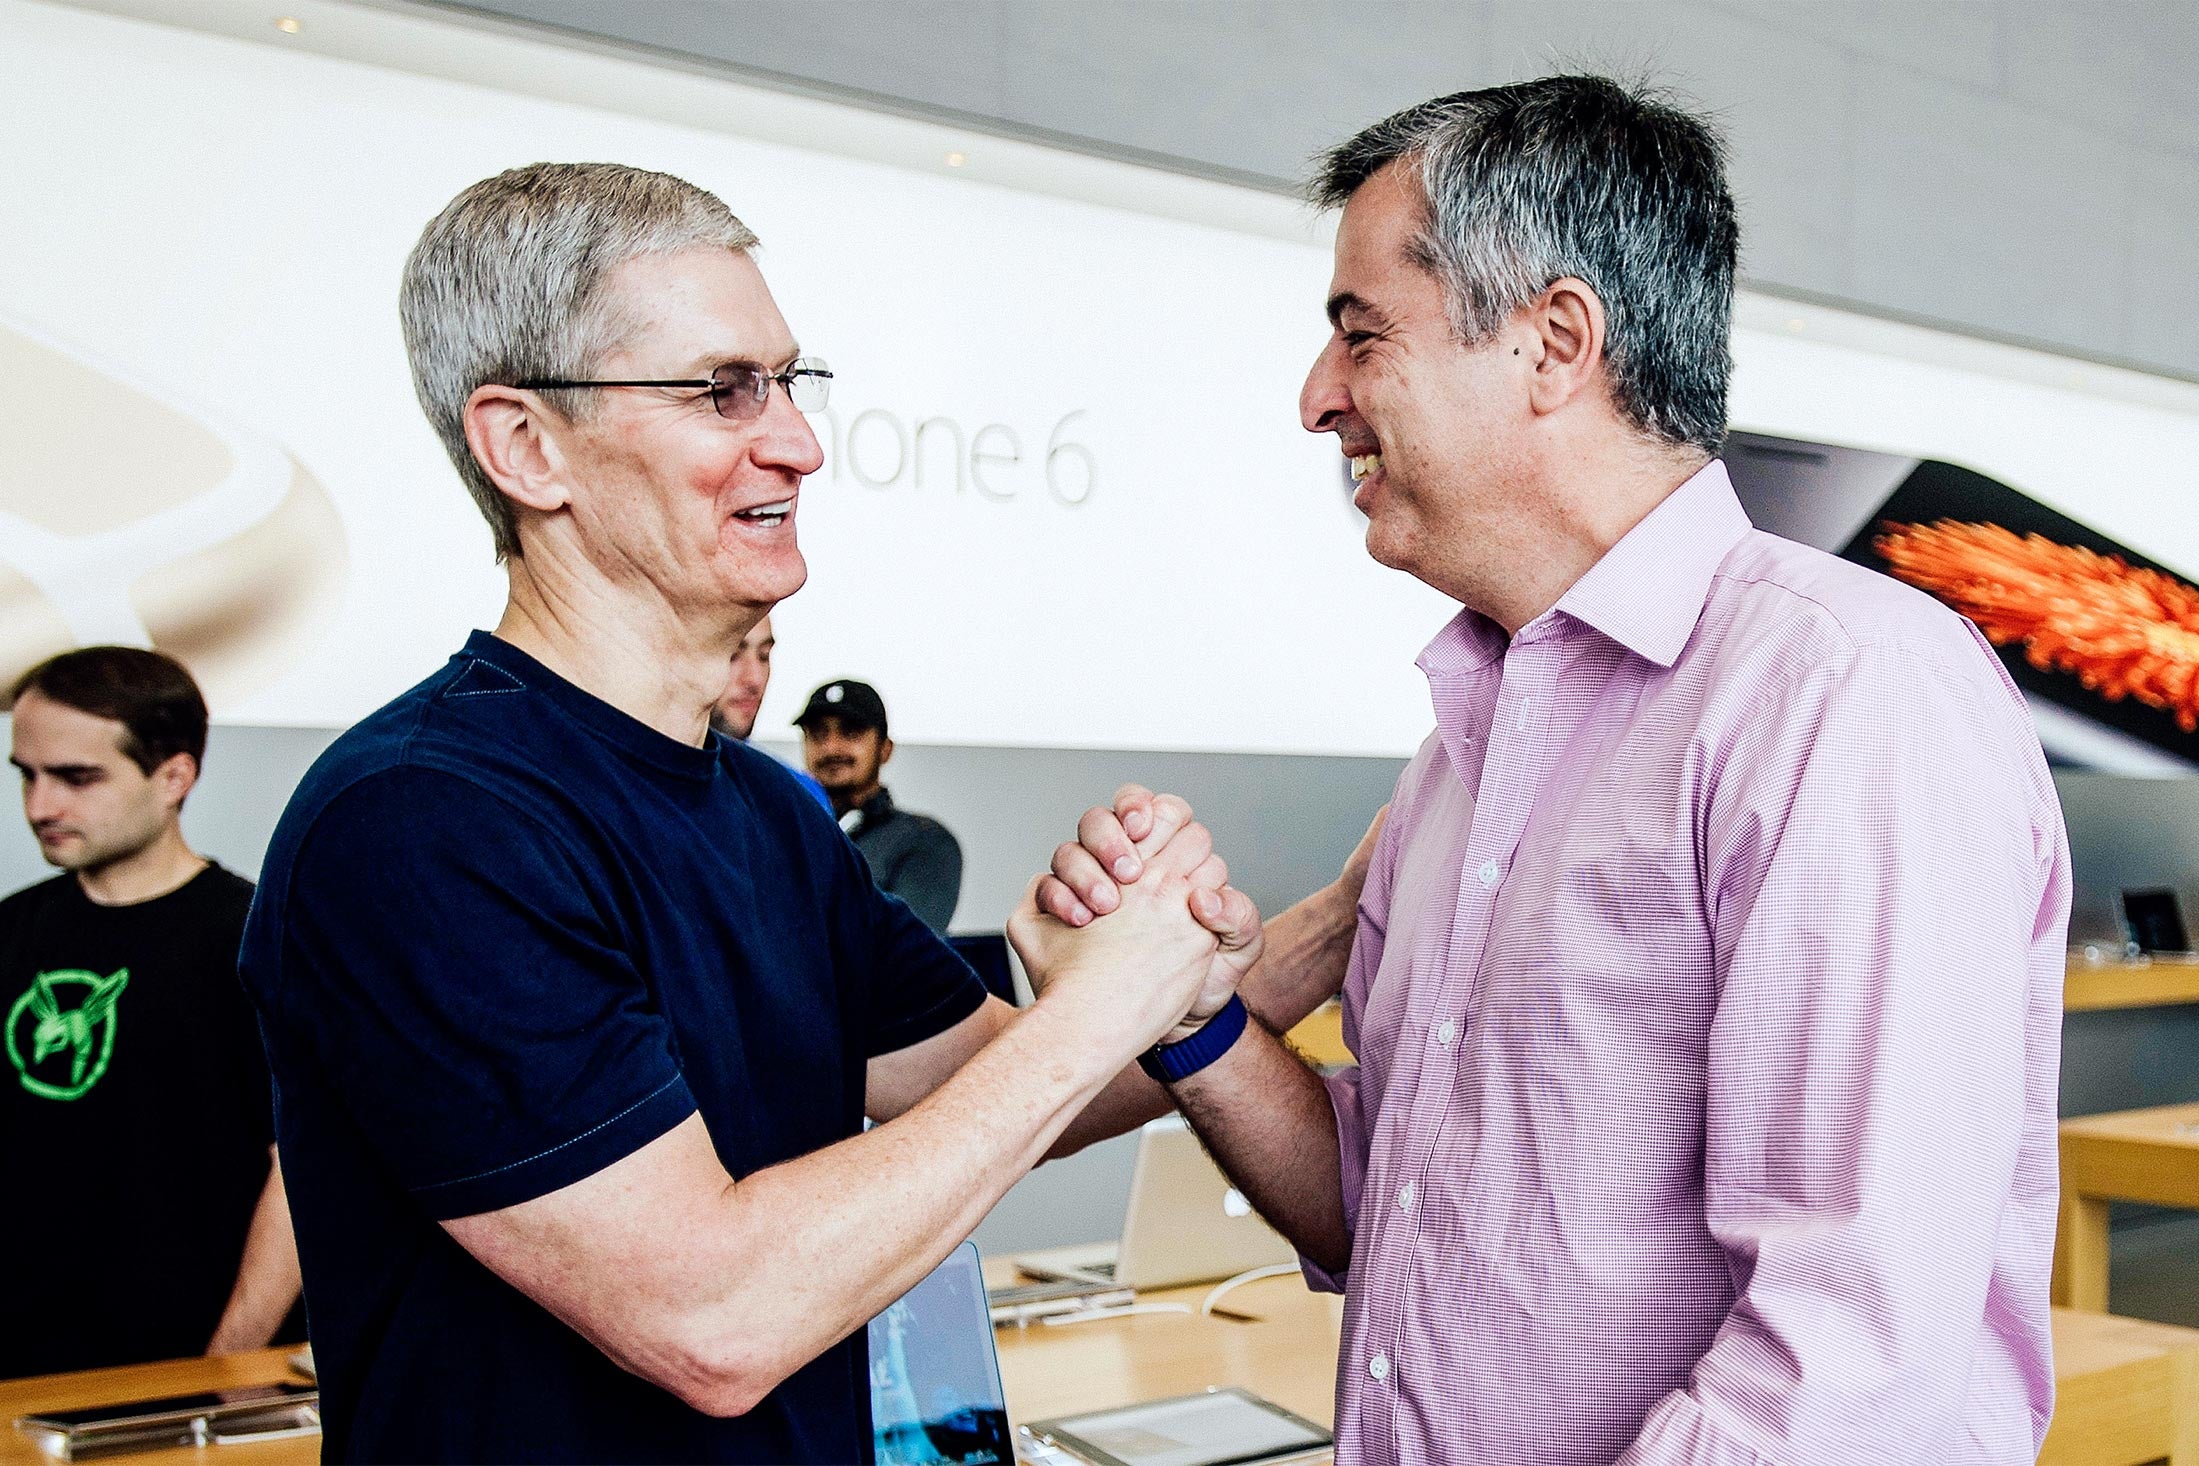 Tim Cook shakes Eddy Cue’s hand in a sort of arm wrestling pose at an Apple Store for the iPhone 6 launch.